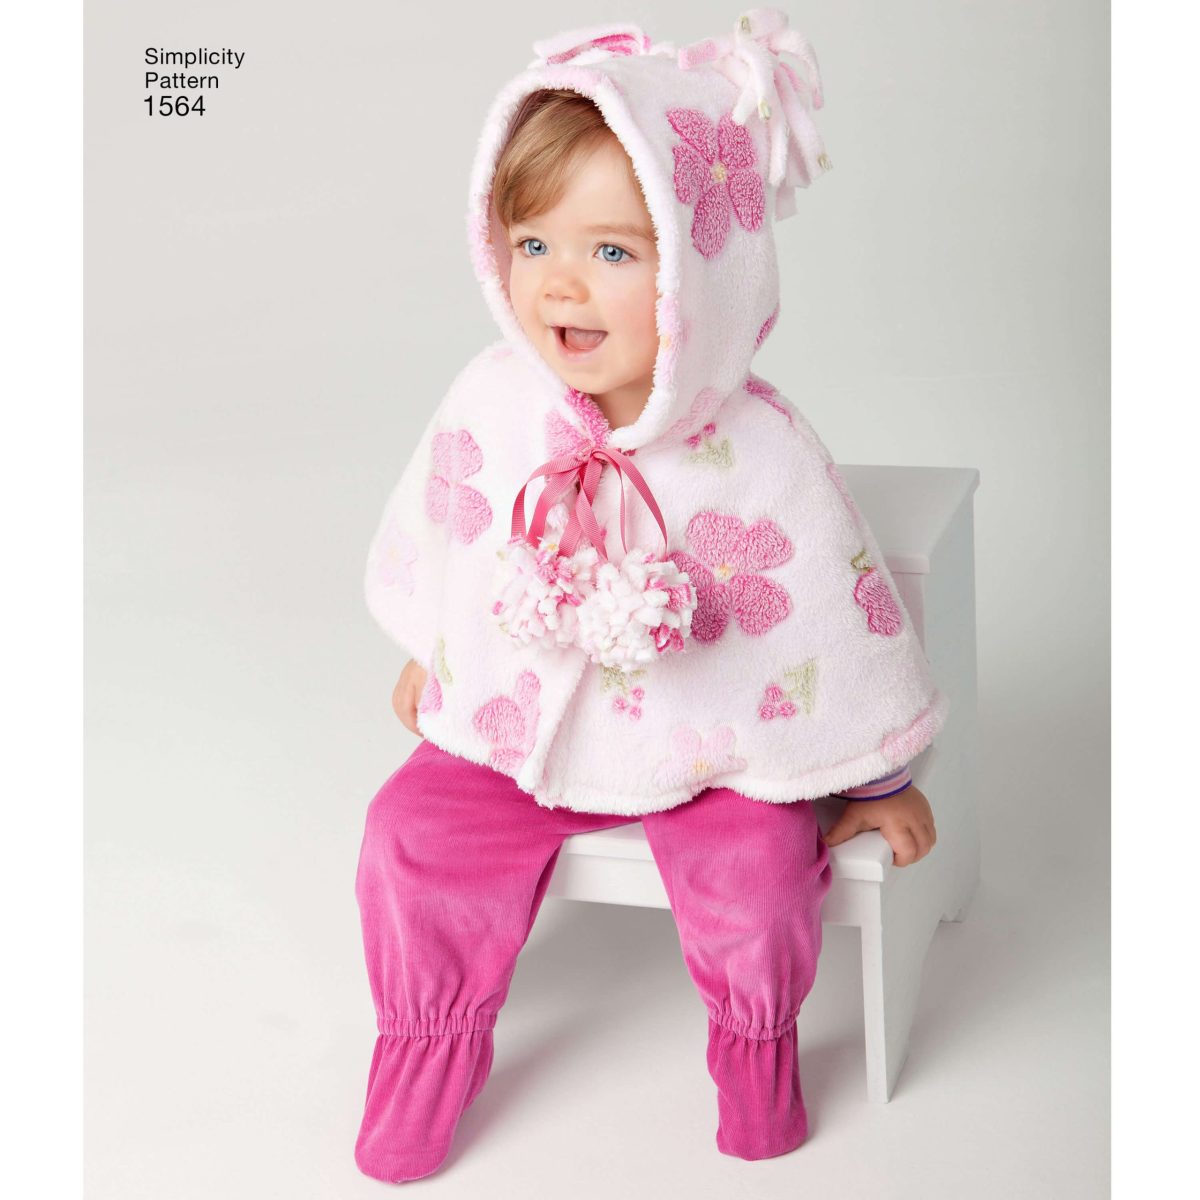 Simplicity Sewing Pattern 1564 Babies' Top, Trousers, Bib, and Blanket Wrap